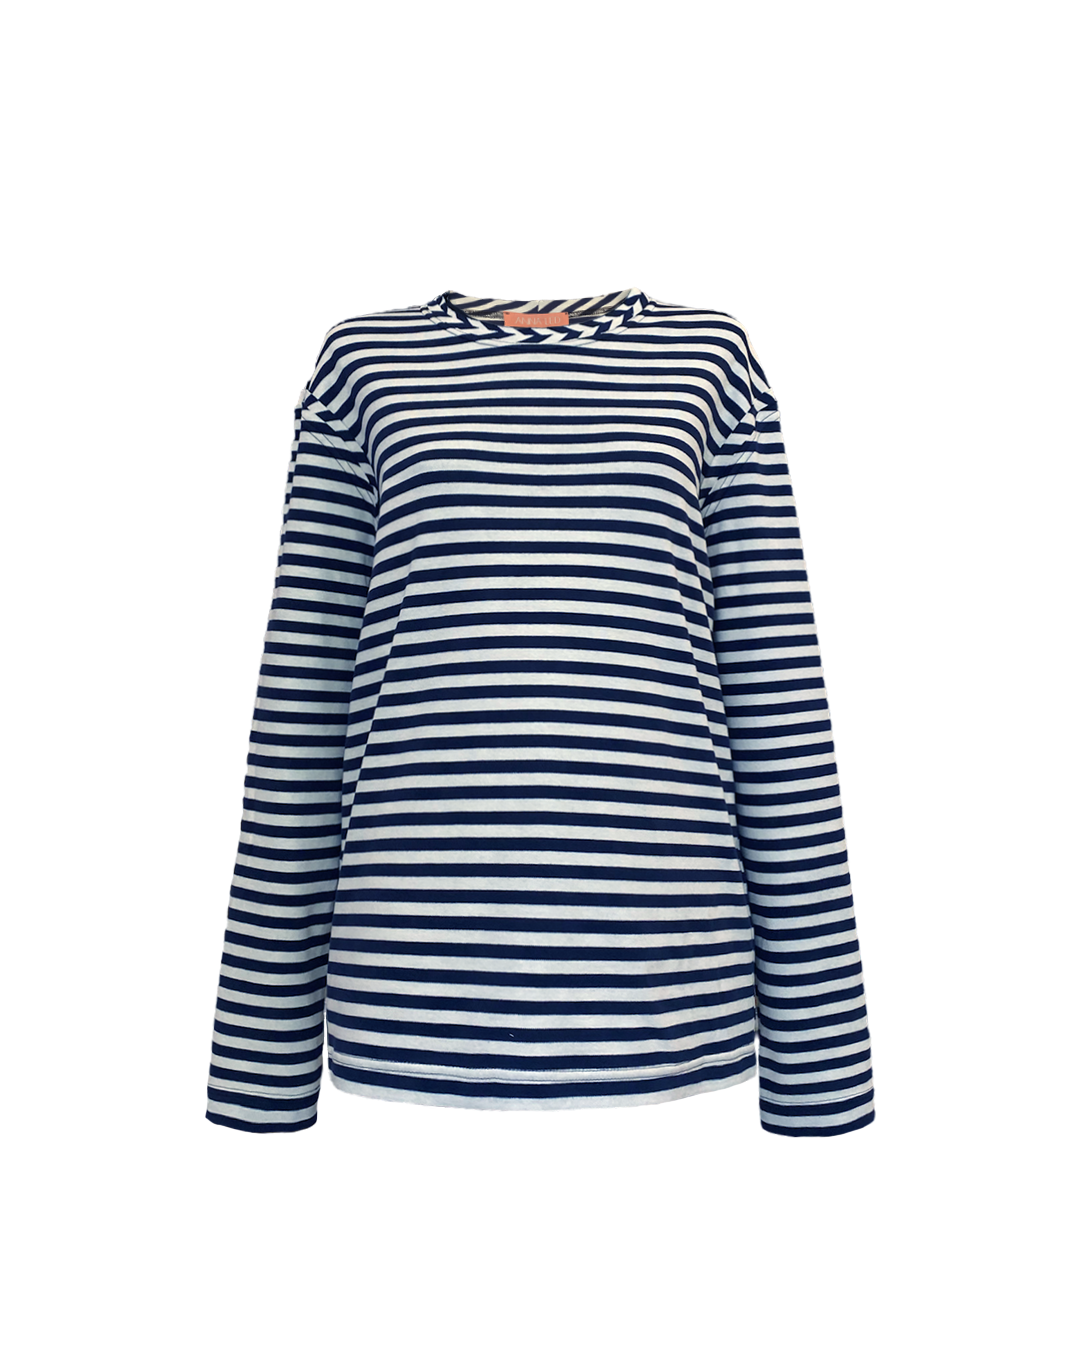 ORGANIC COTTON LONG-SLEEVE T-SHIRT WITH STRIPES